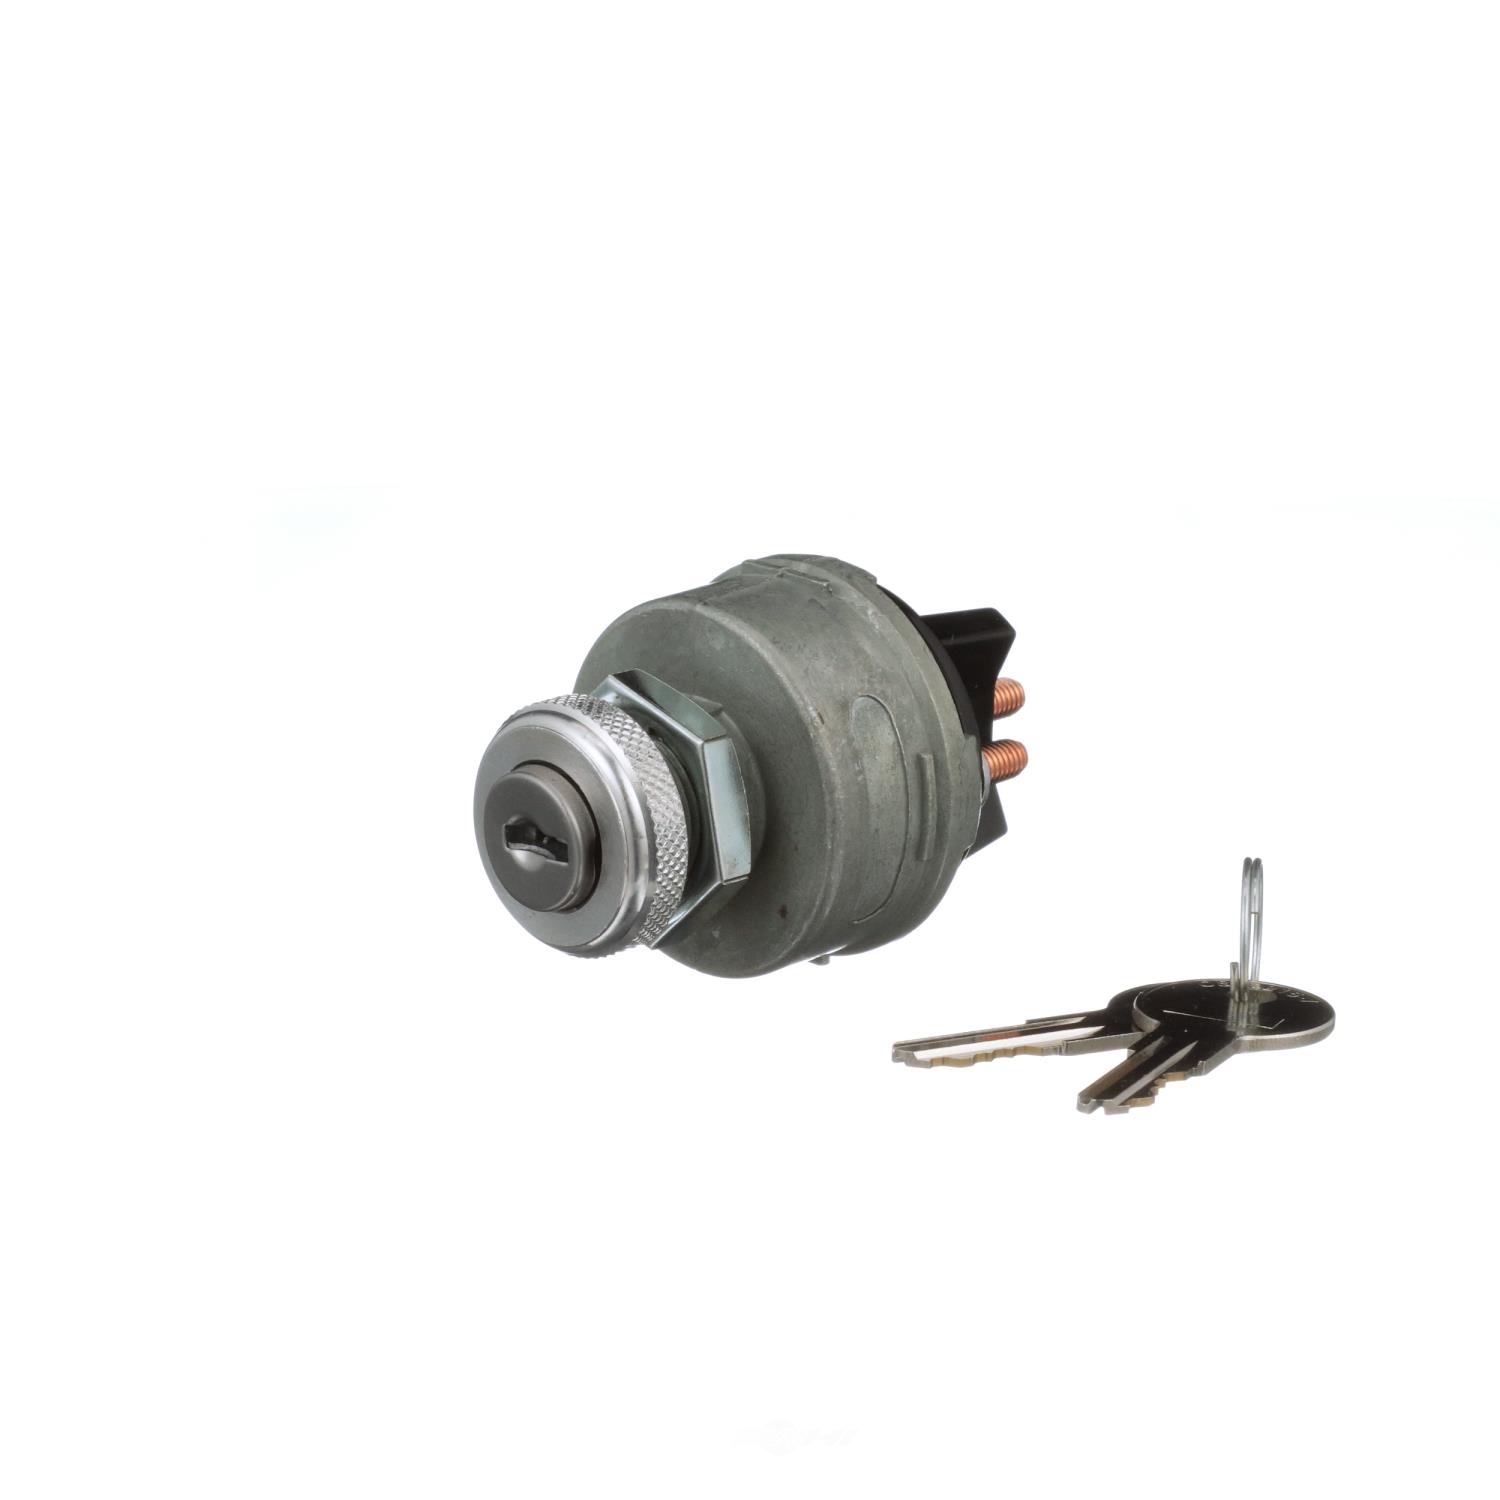 STANDARD T-SERIES - Ignition Lock And Cylinder Switch - STT US14T